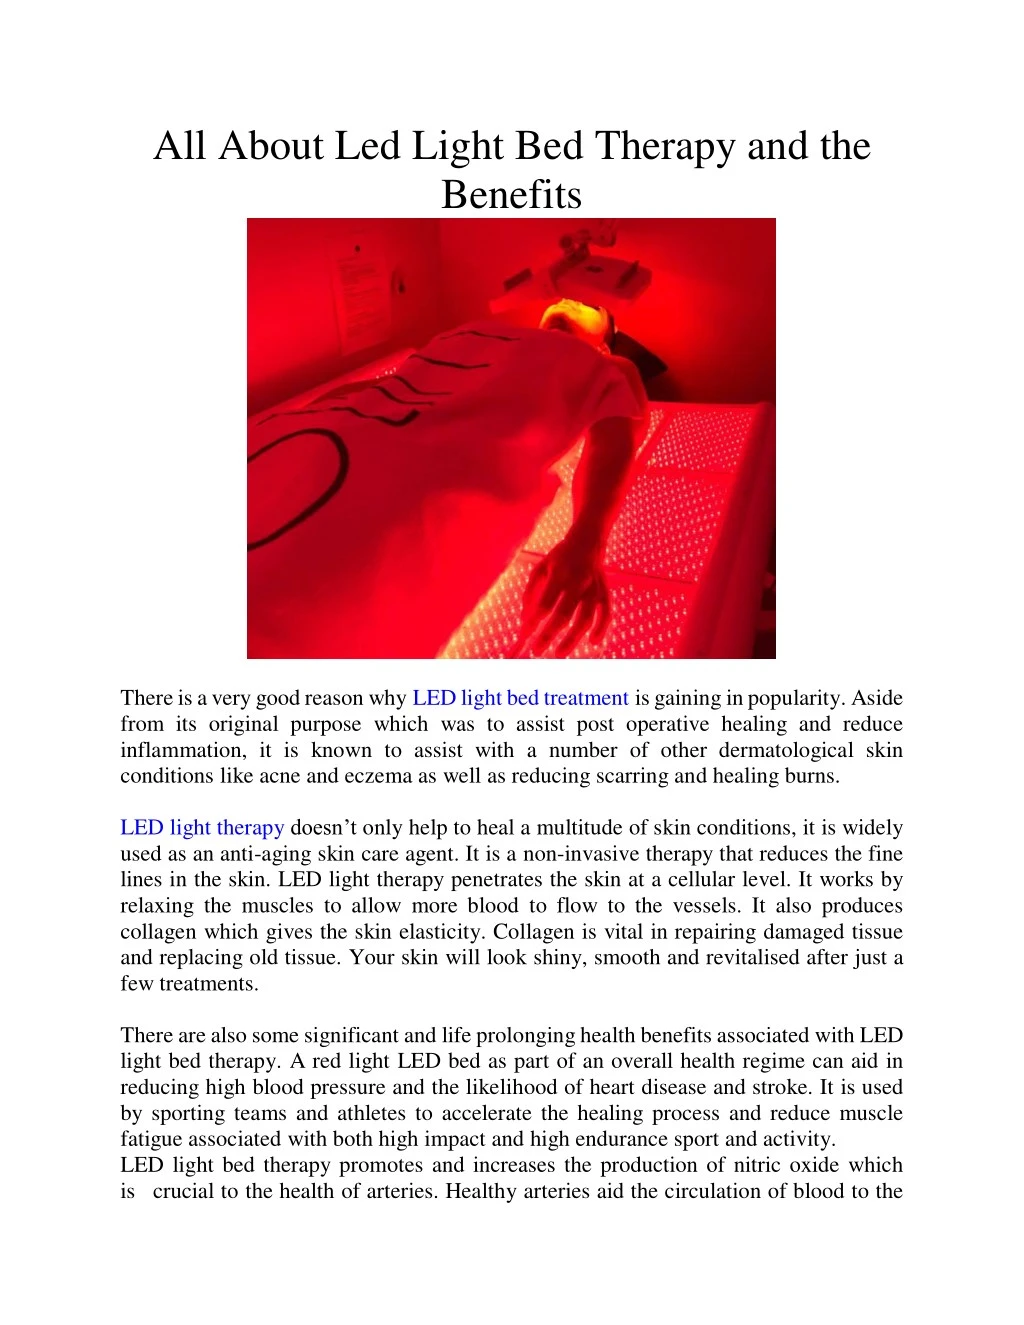 all about led light bed therapy and the benefits